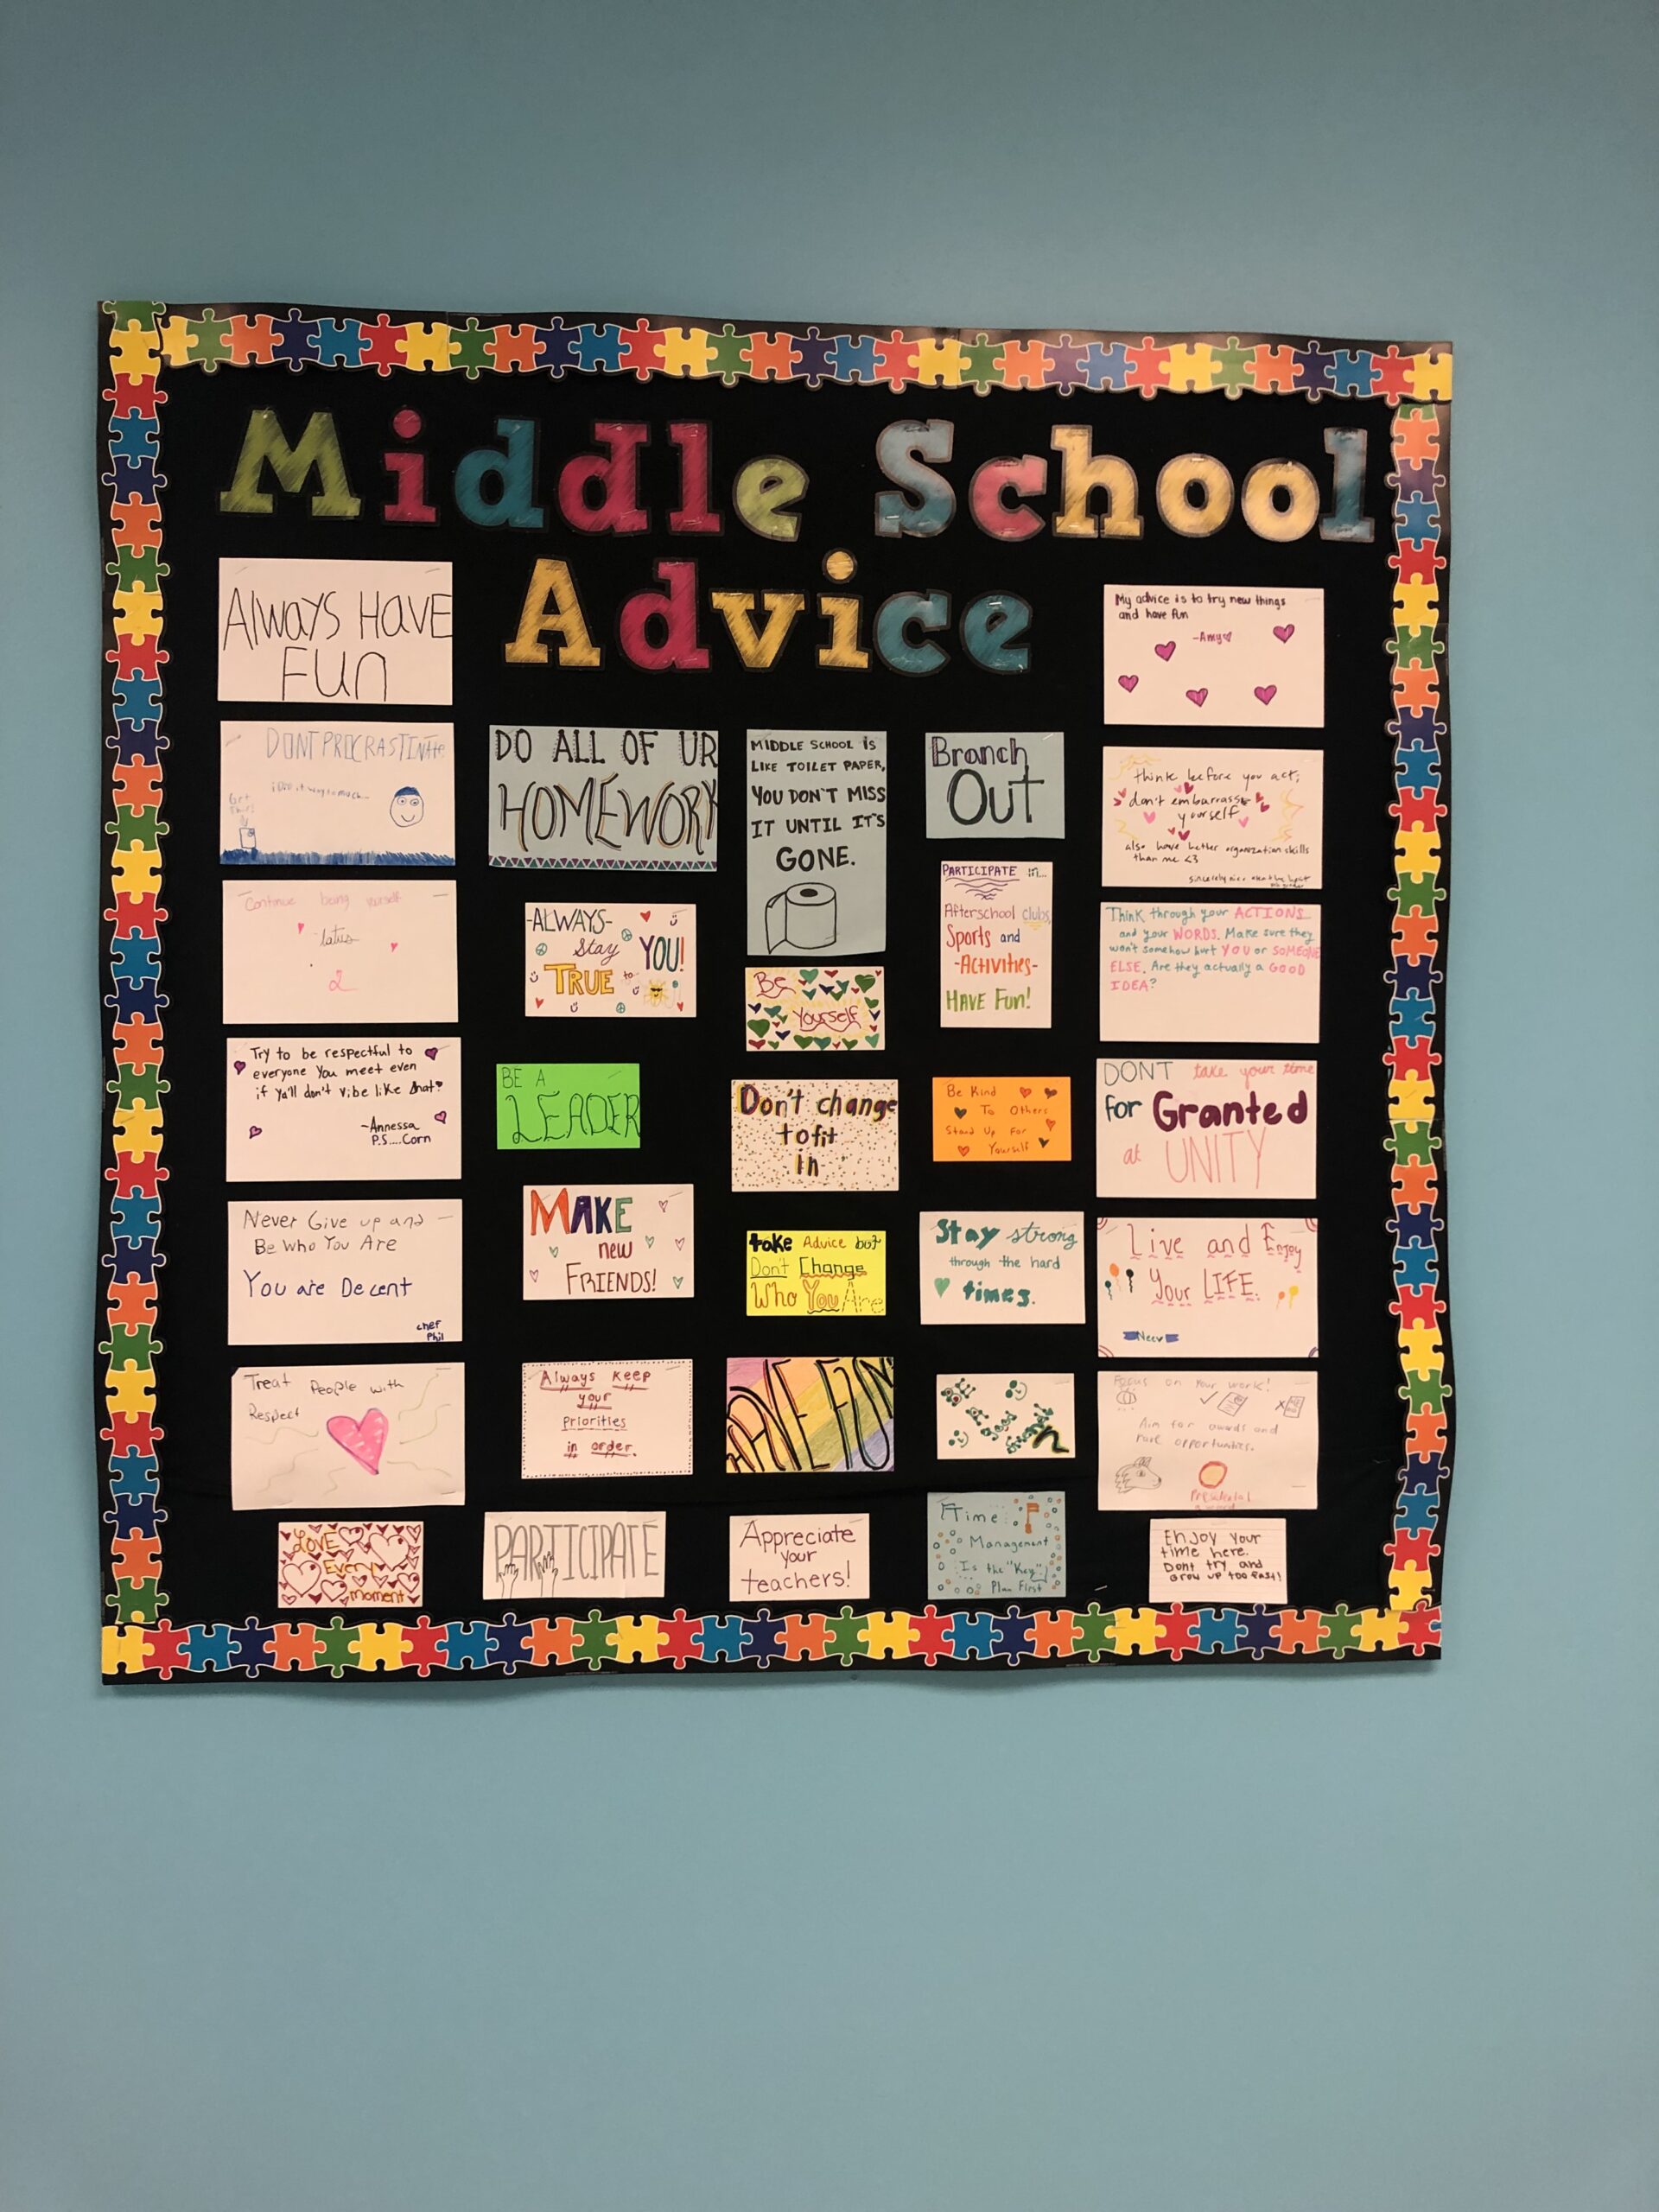 A Board says Middle School Advice and has papers written by kids on it.